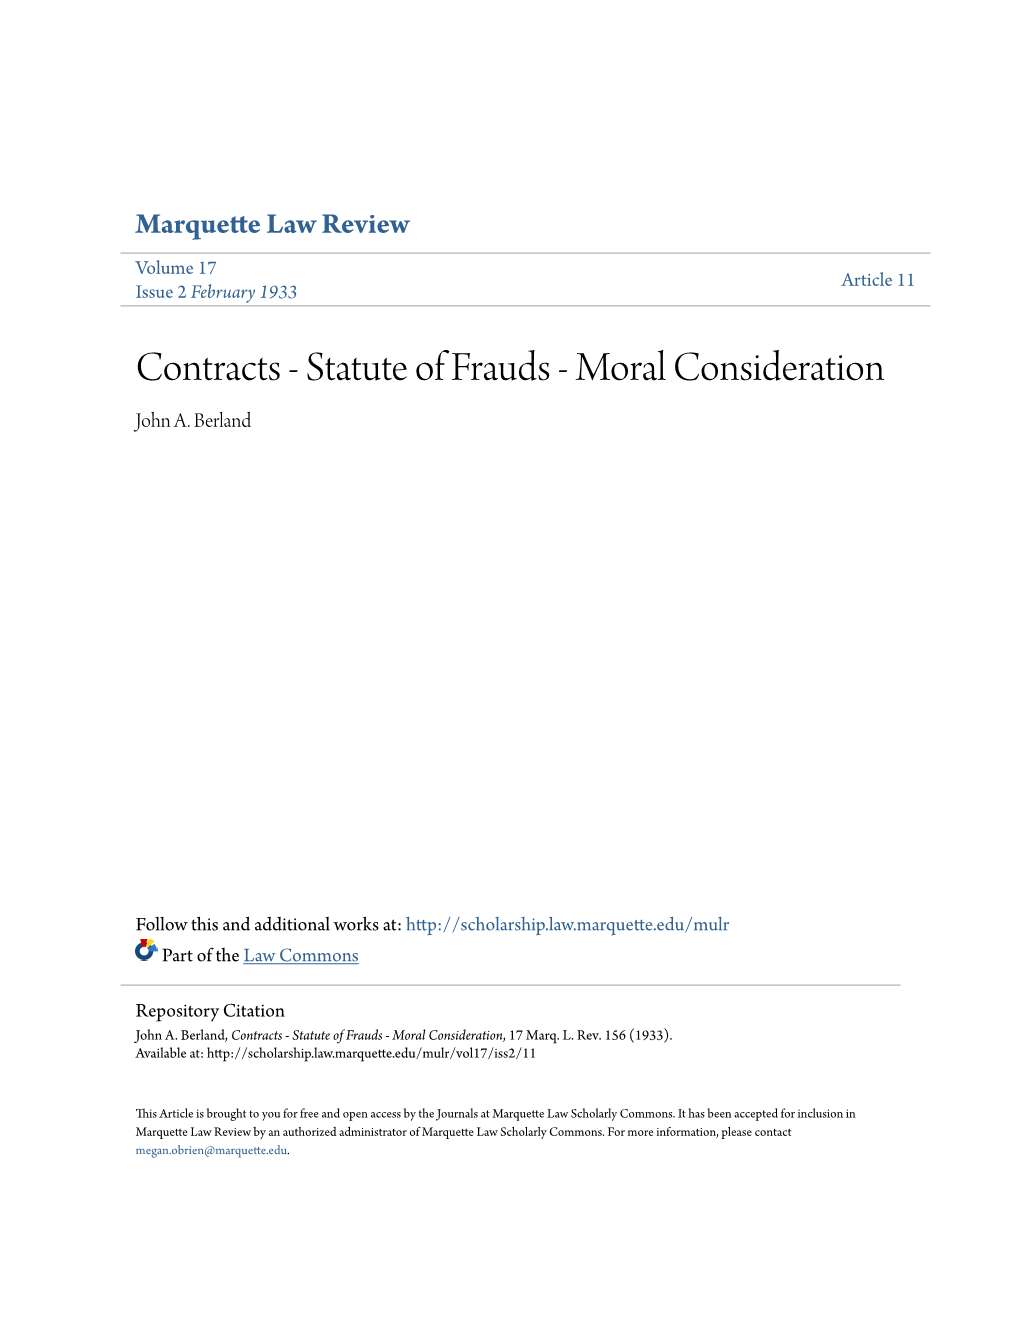 Contracts - Statute of Frauds - Moral Consideration John A